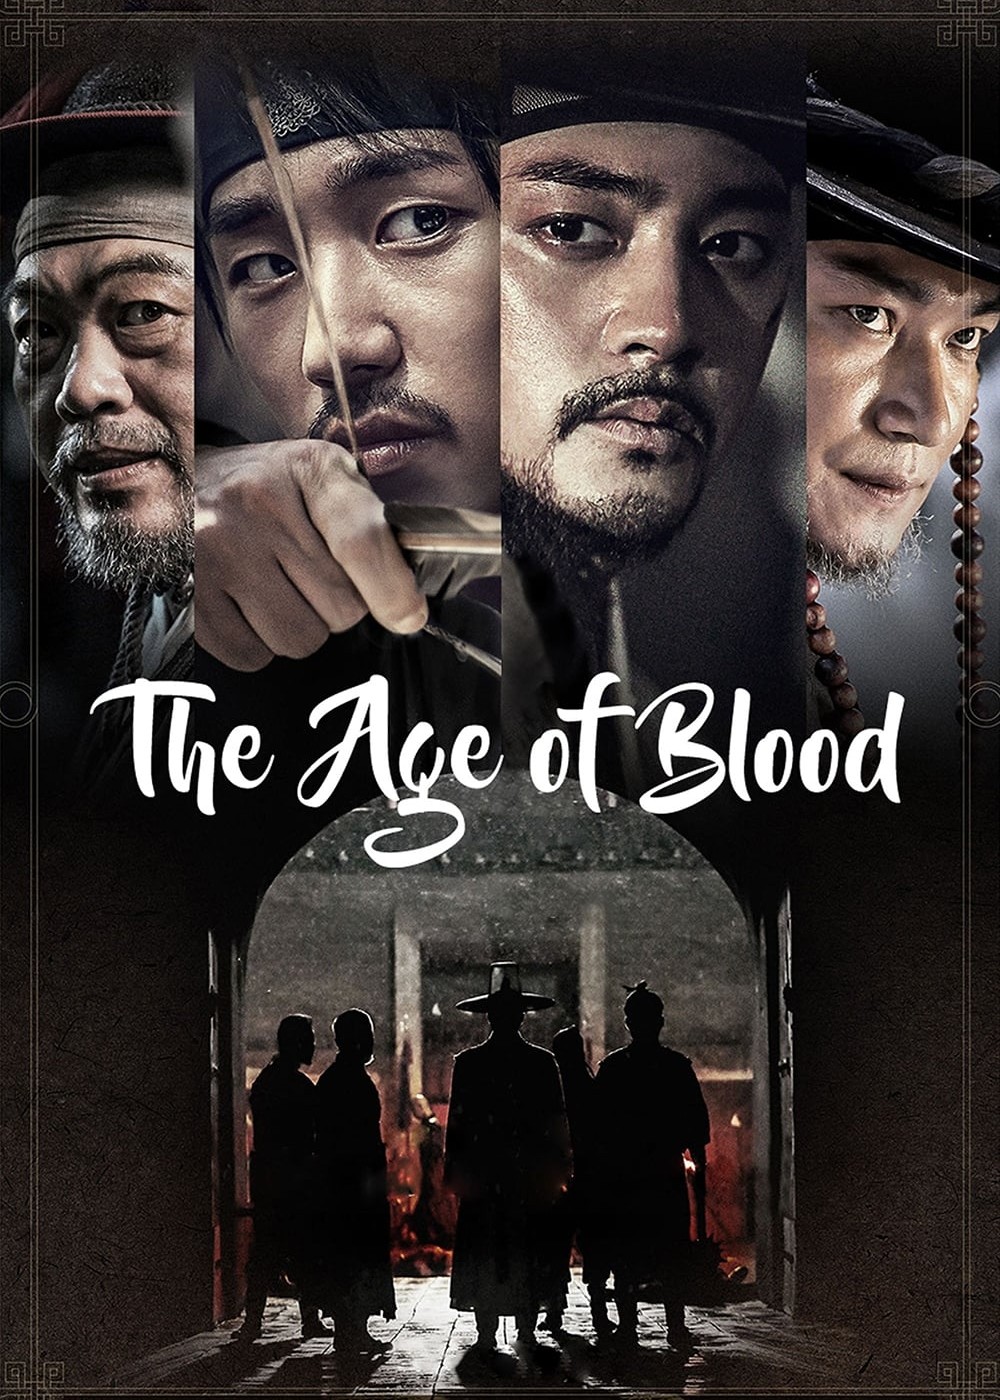 The Age of Blood 2017